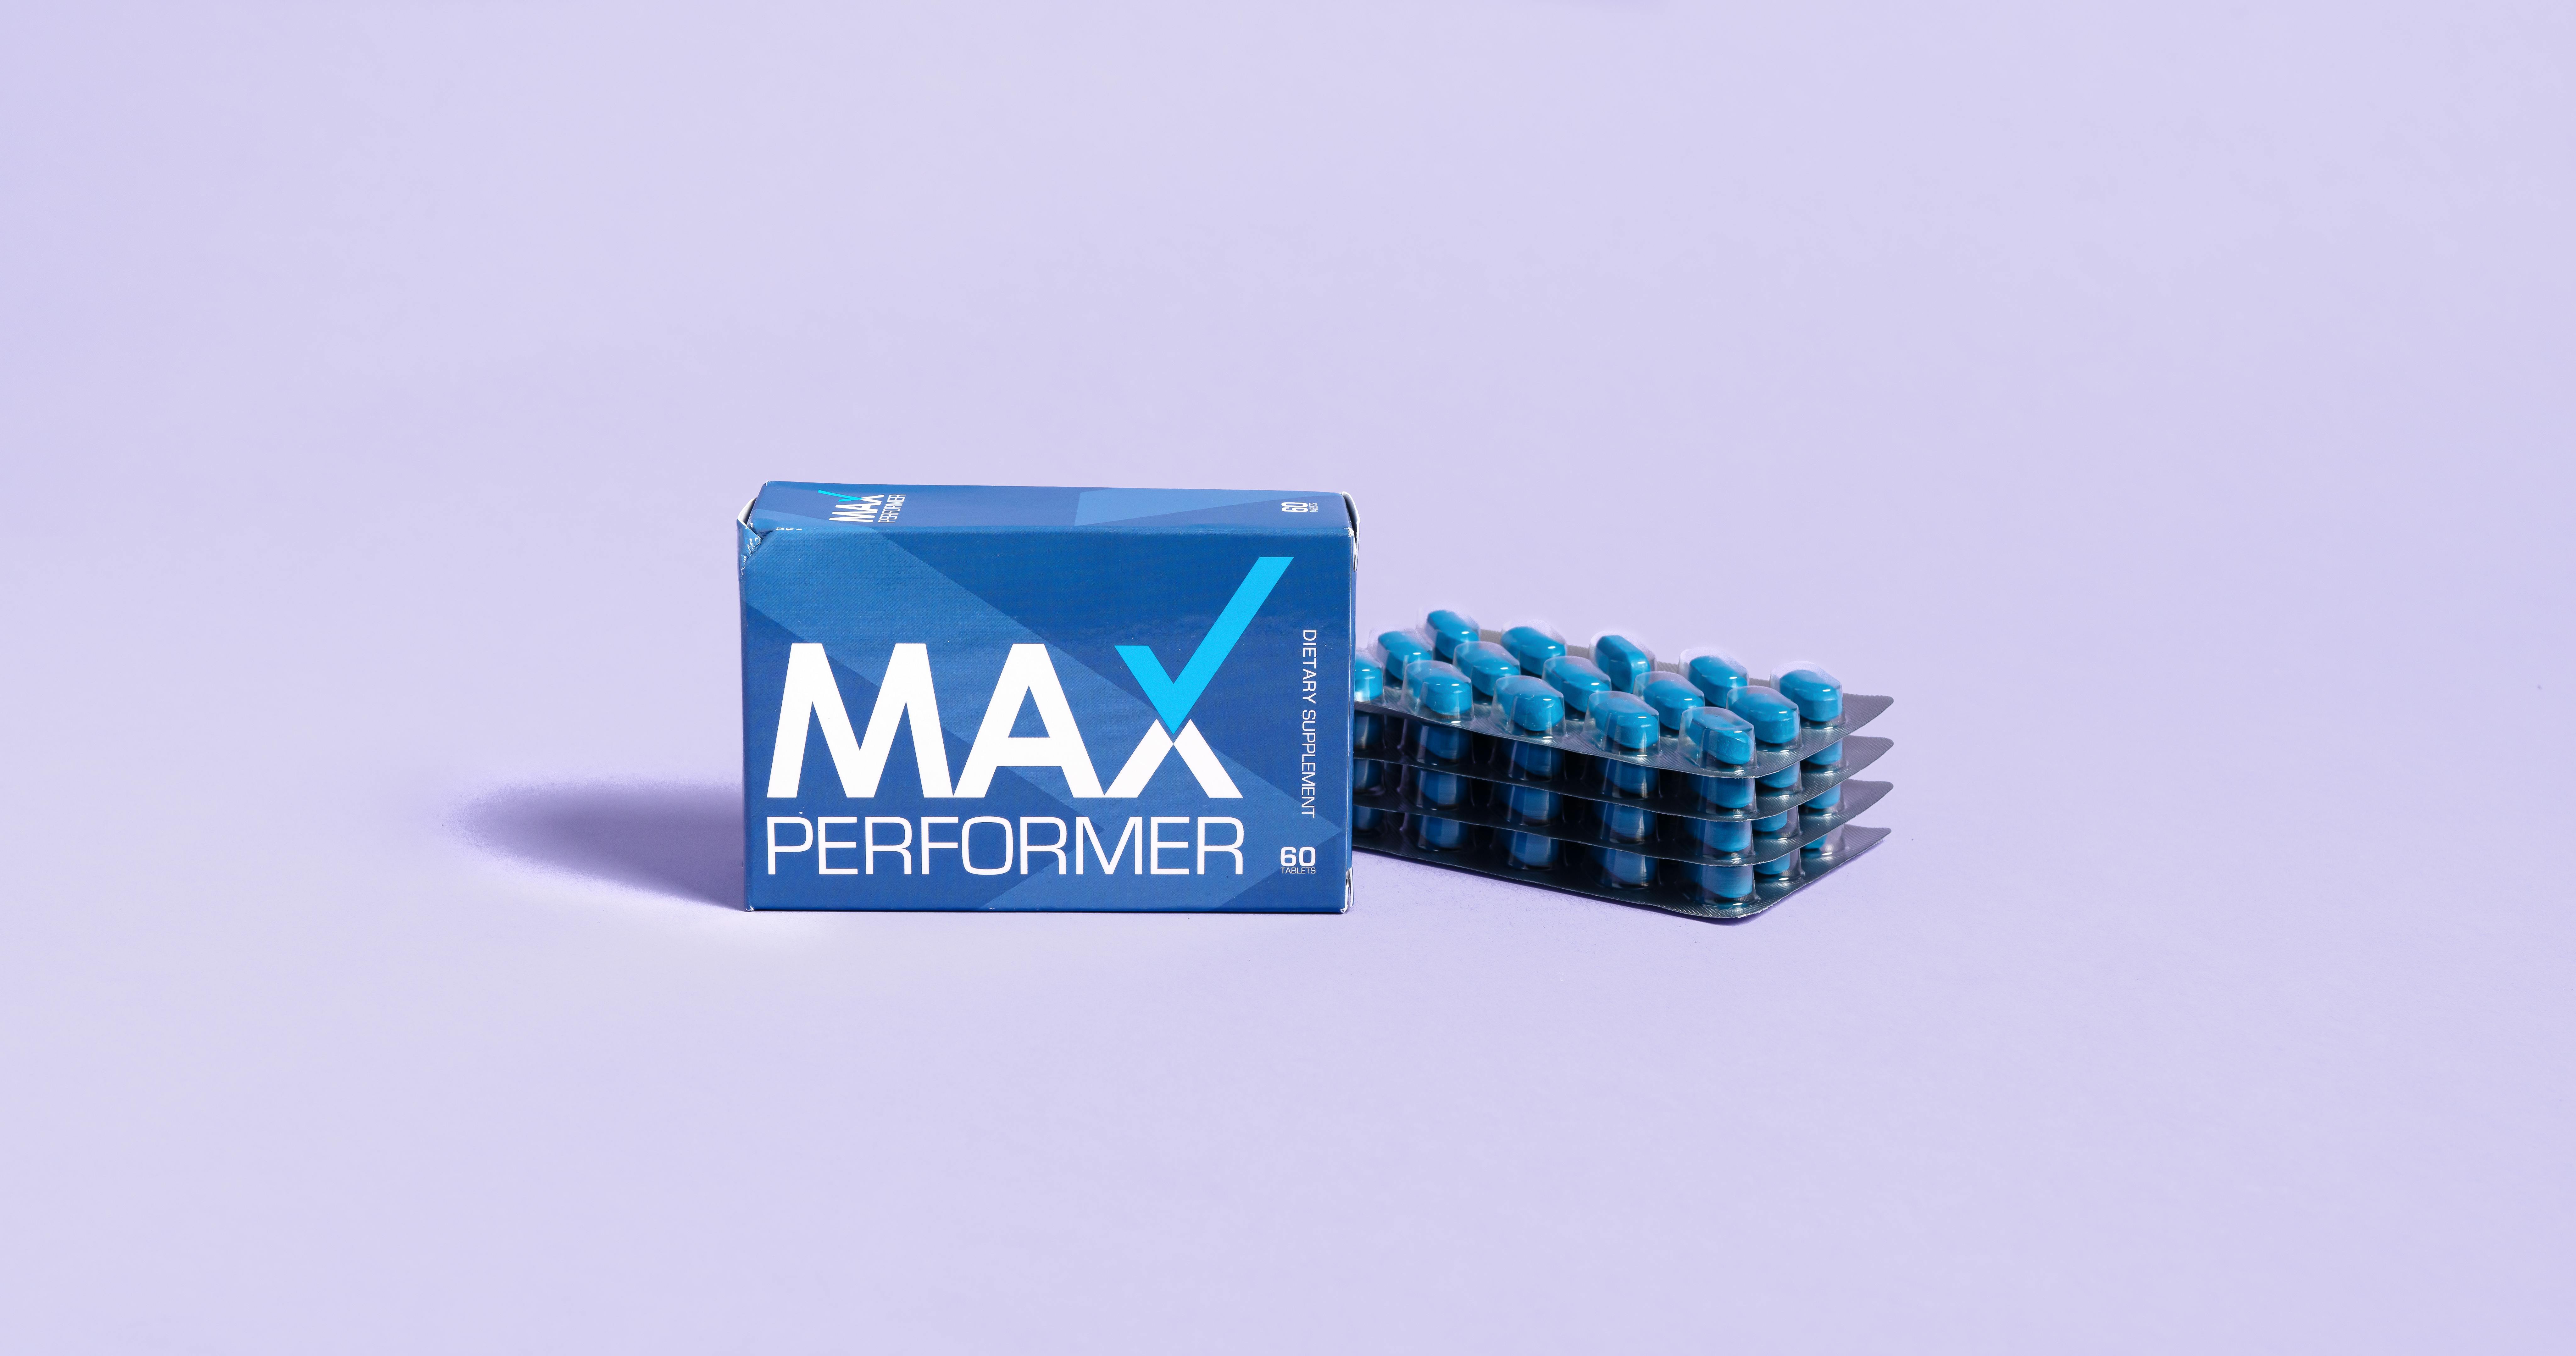 Performer 8 Review: Legit Male Enhancement Supplement Or Performer 8 Scam?